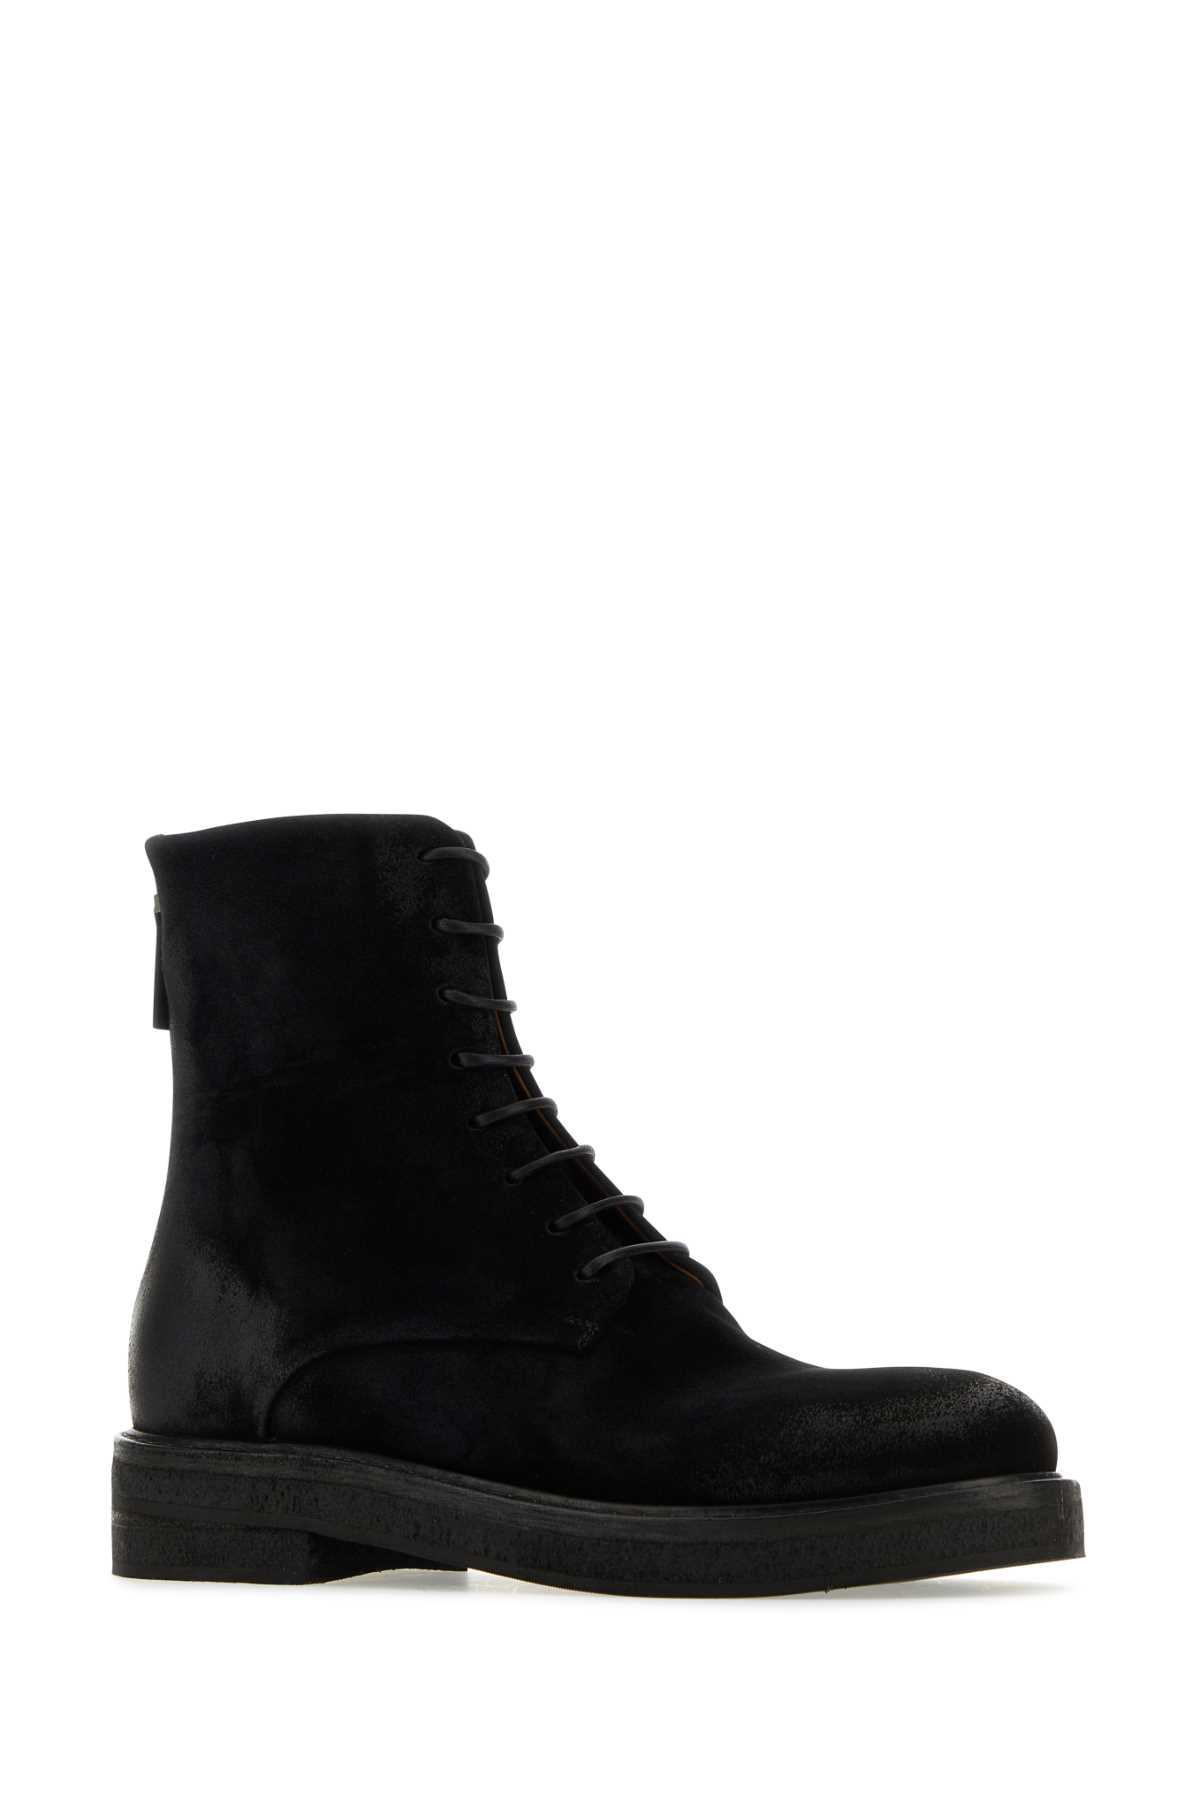 Marsèll Black Suede Ankle Boots